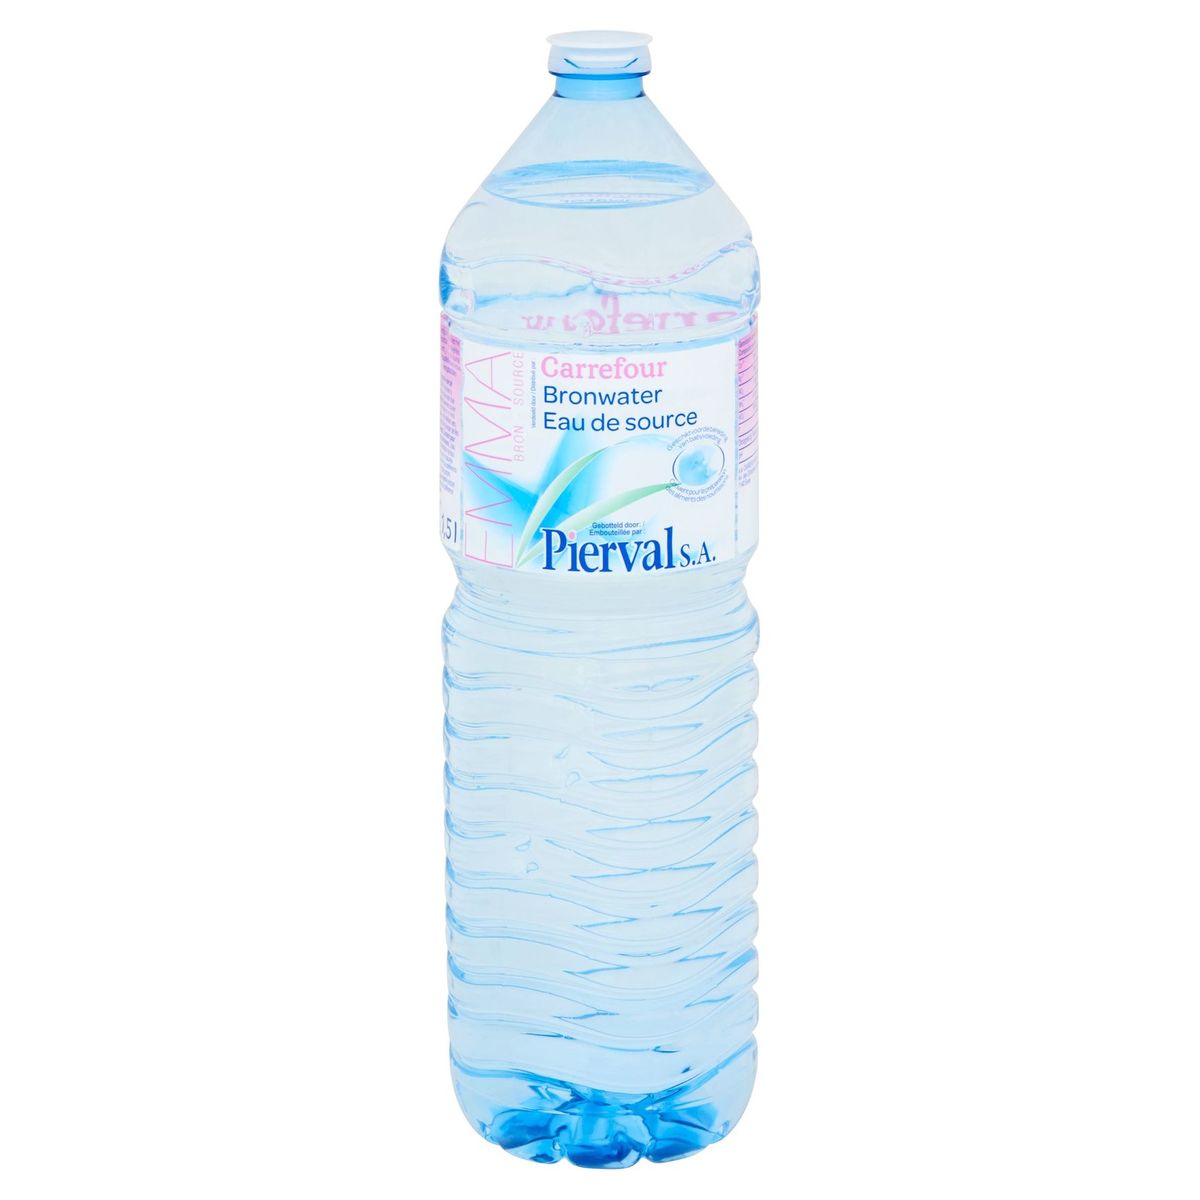 Carrefour Bronwater 1.5 L